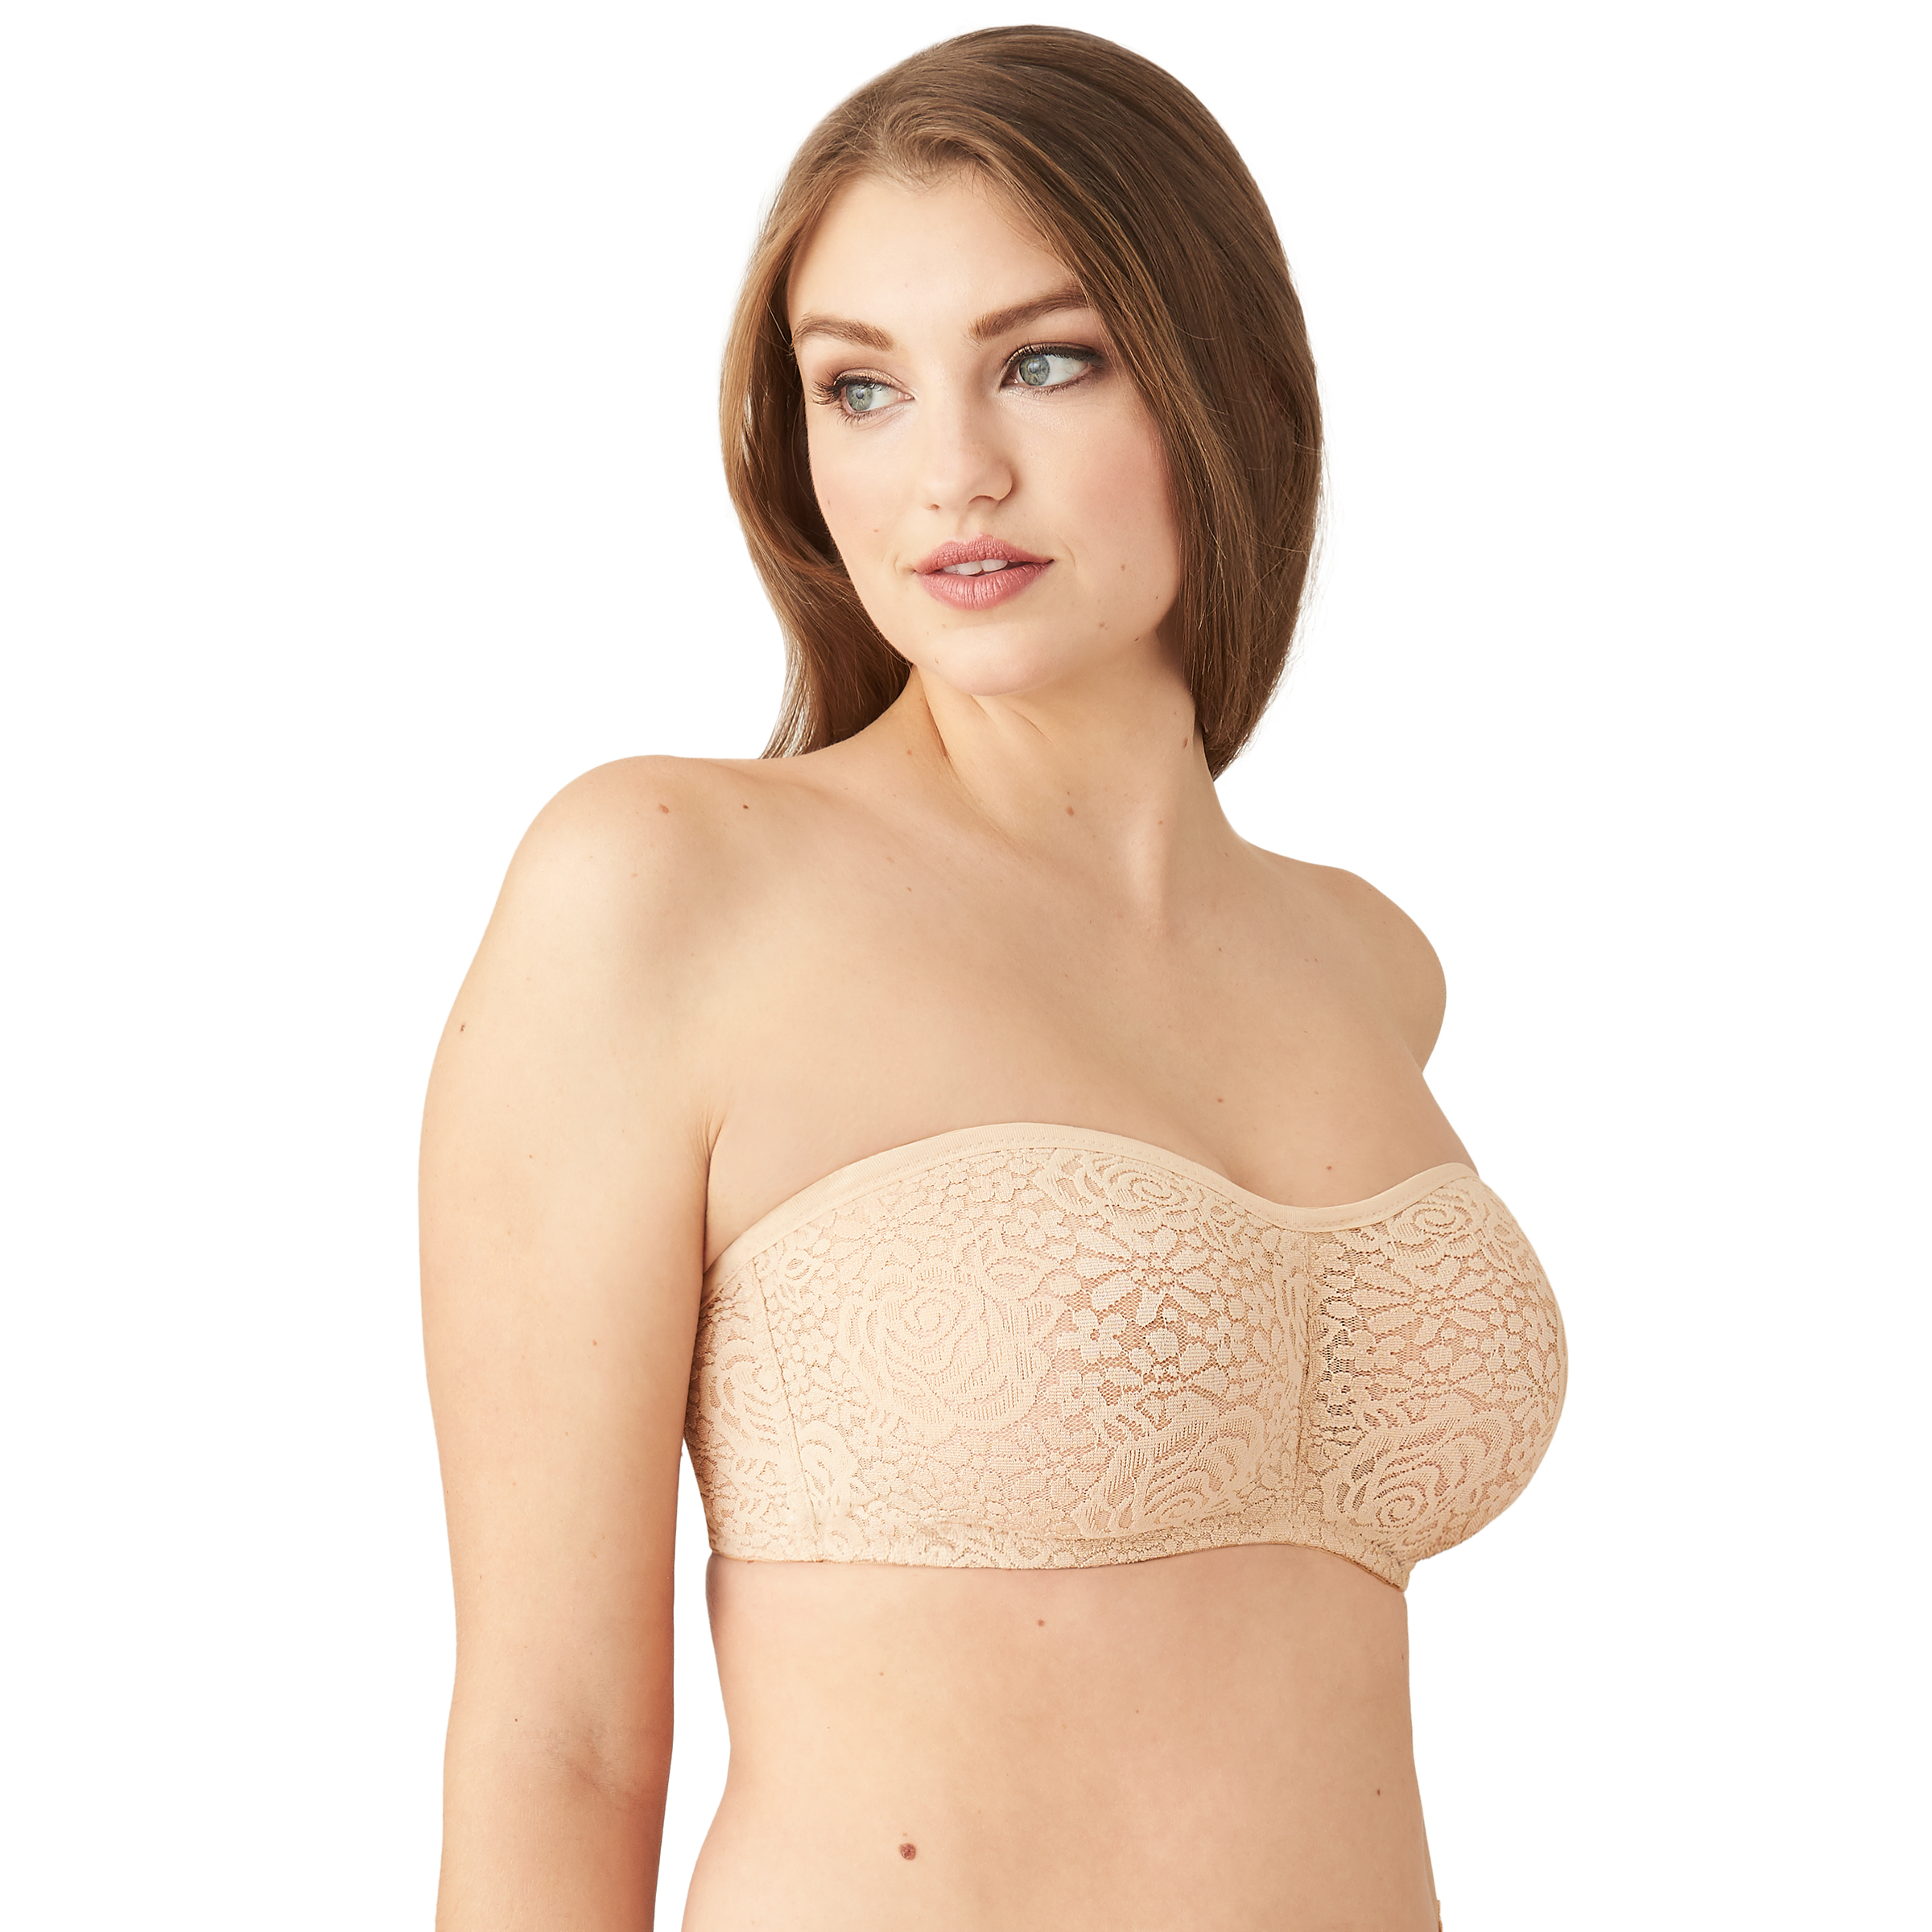 Wacoal 854205 or 65449 Halo LaceSeamless Underwire Strapless [854205 or  65449] : Bras, Nursing Bras, Shapers, Slips, Panties, All-In-Ones,  Camisoles WOB Lingerie